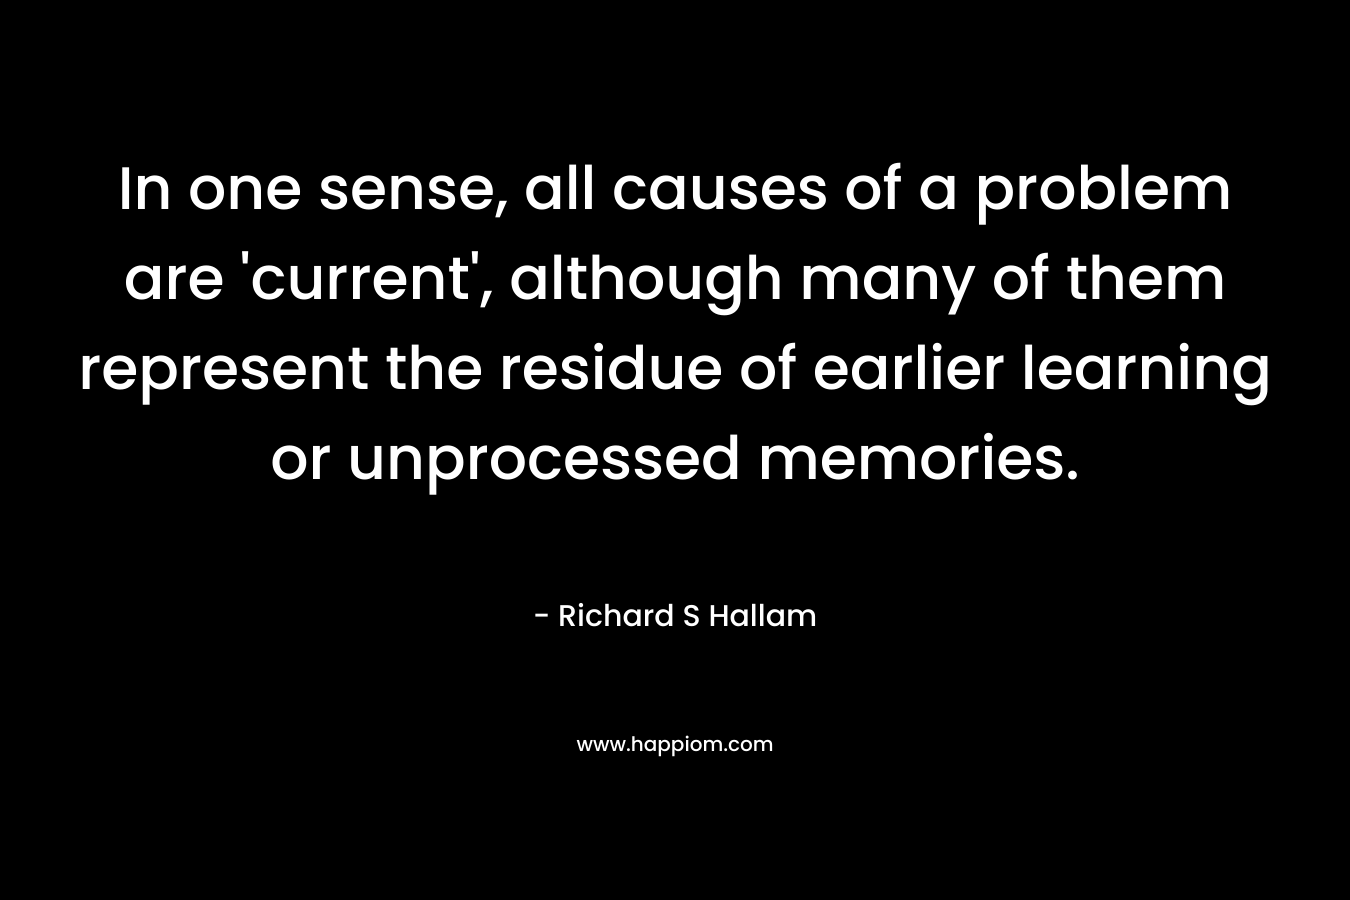 In one sense, all causes of a problem are ‘current’, although many of them represent the residue of earlier learning or unprocessed memories. – Richard S Hallam